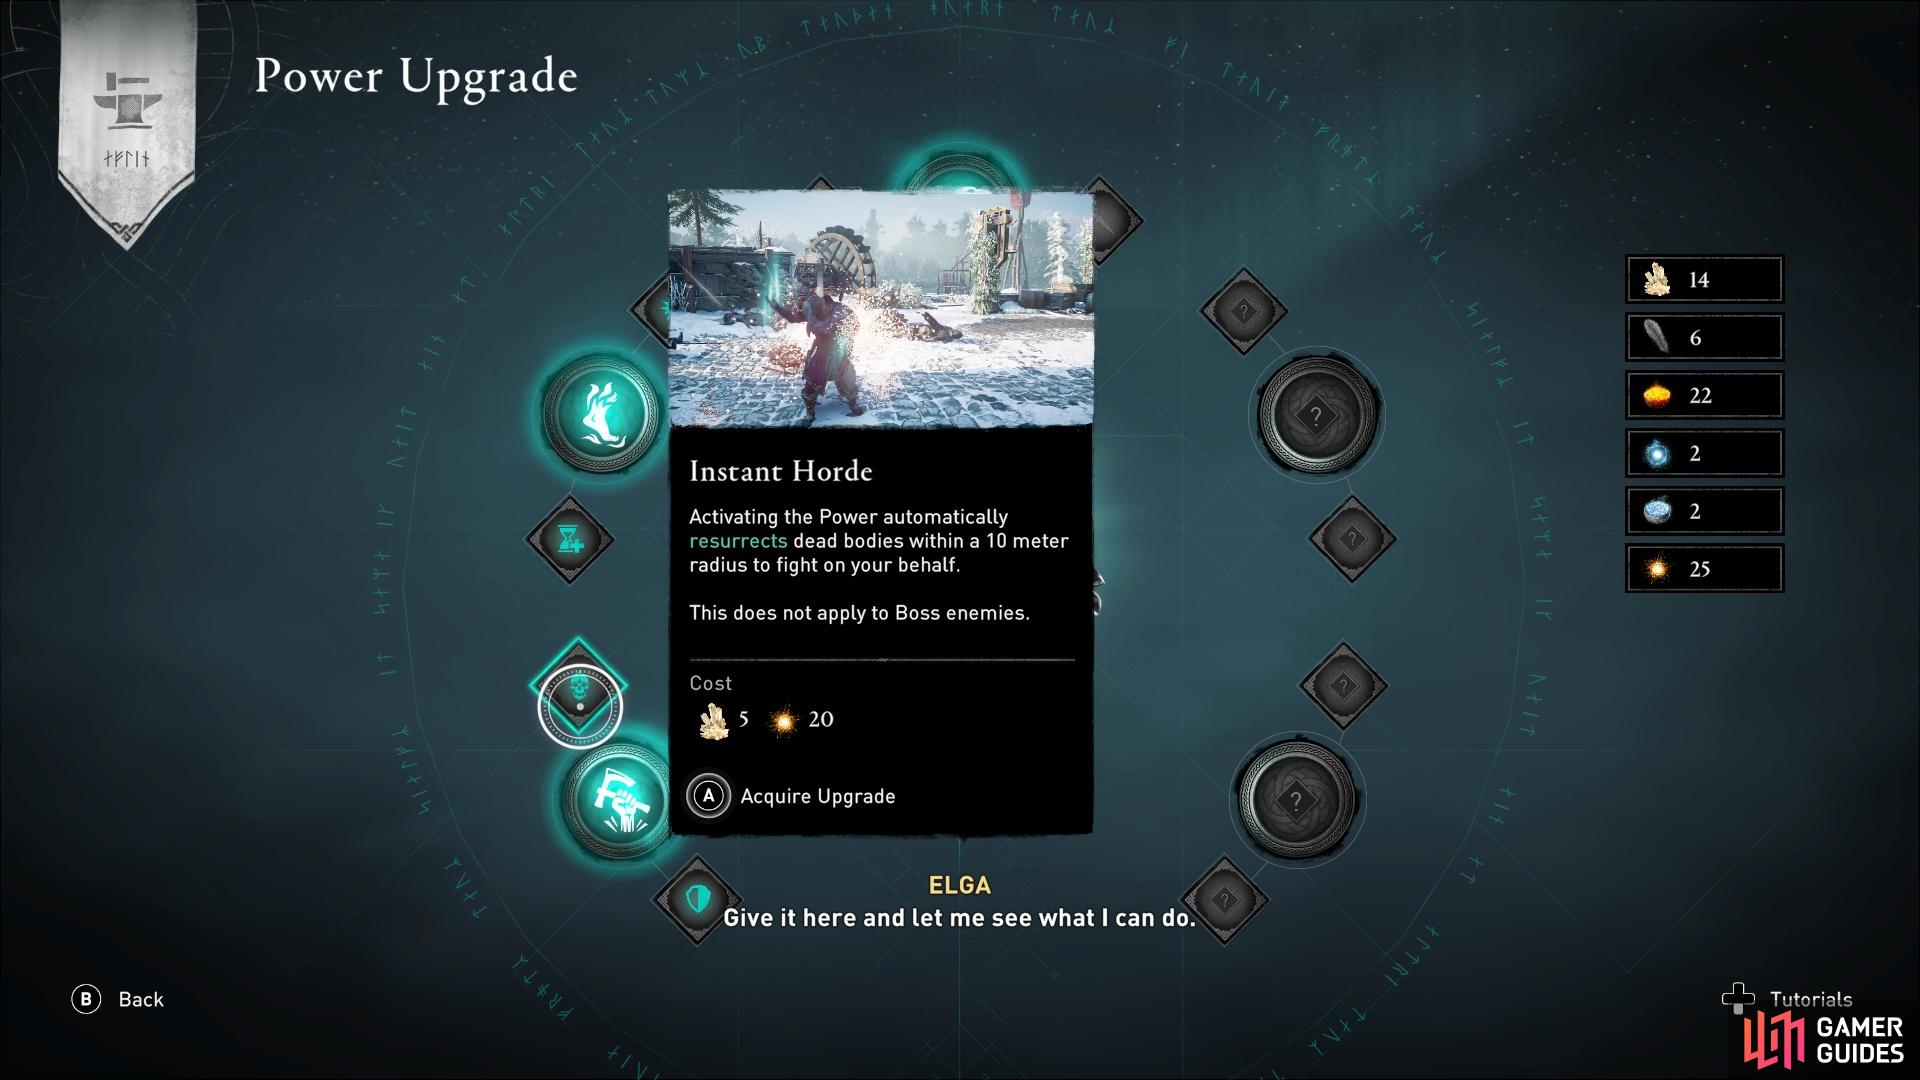 The Instant Horde upgrade lets you resurrect nearby dead bodies